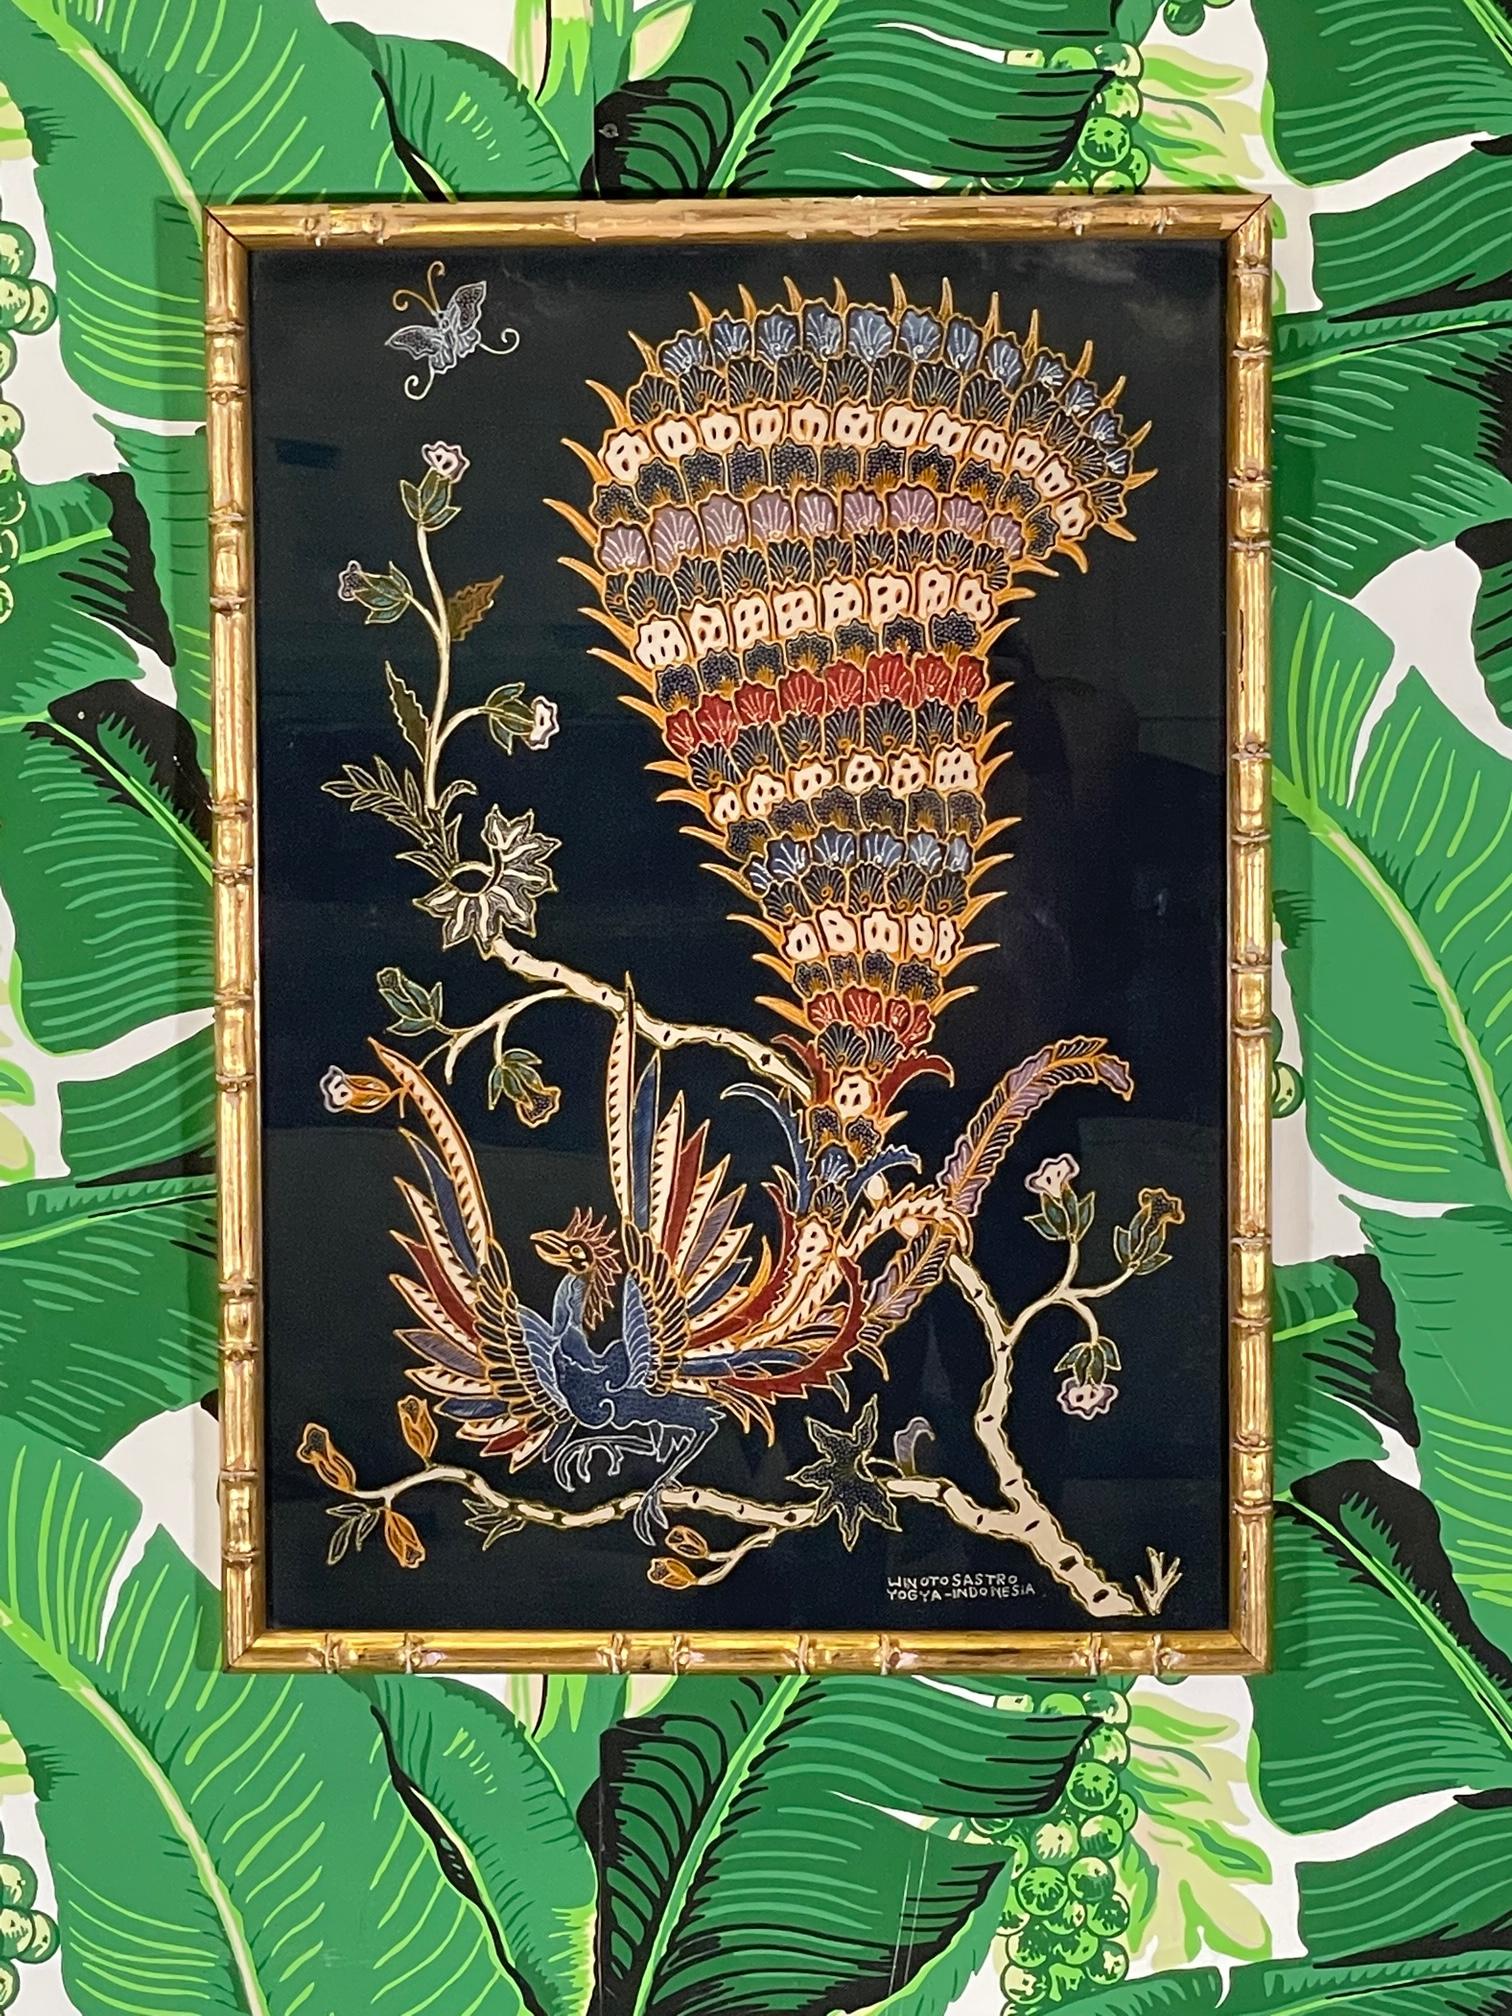 Framed Indonesian batik print by Winotosastro. Framed in gilded faux bamboo carved wood. Beautiful Southeast Asian artwork featuring an exotic bird of paradise with colorful plumage. Good condition with imperfections consistent with age, namely wear